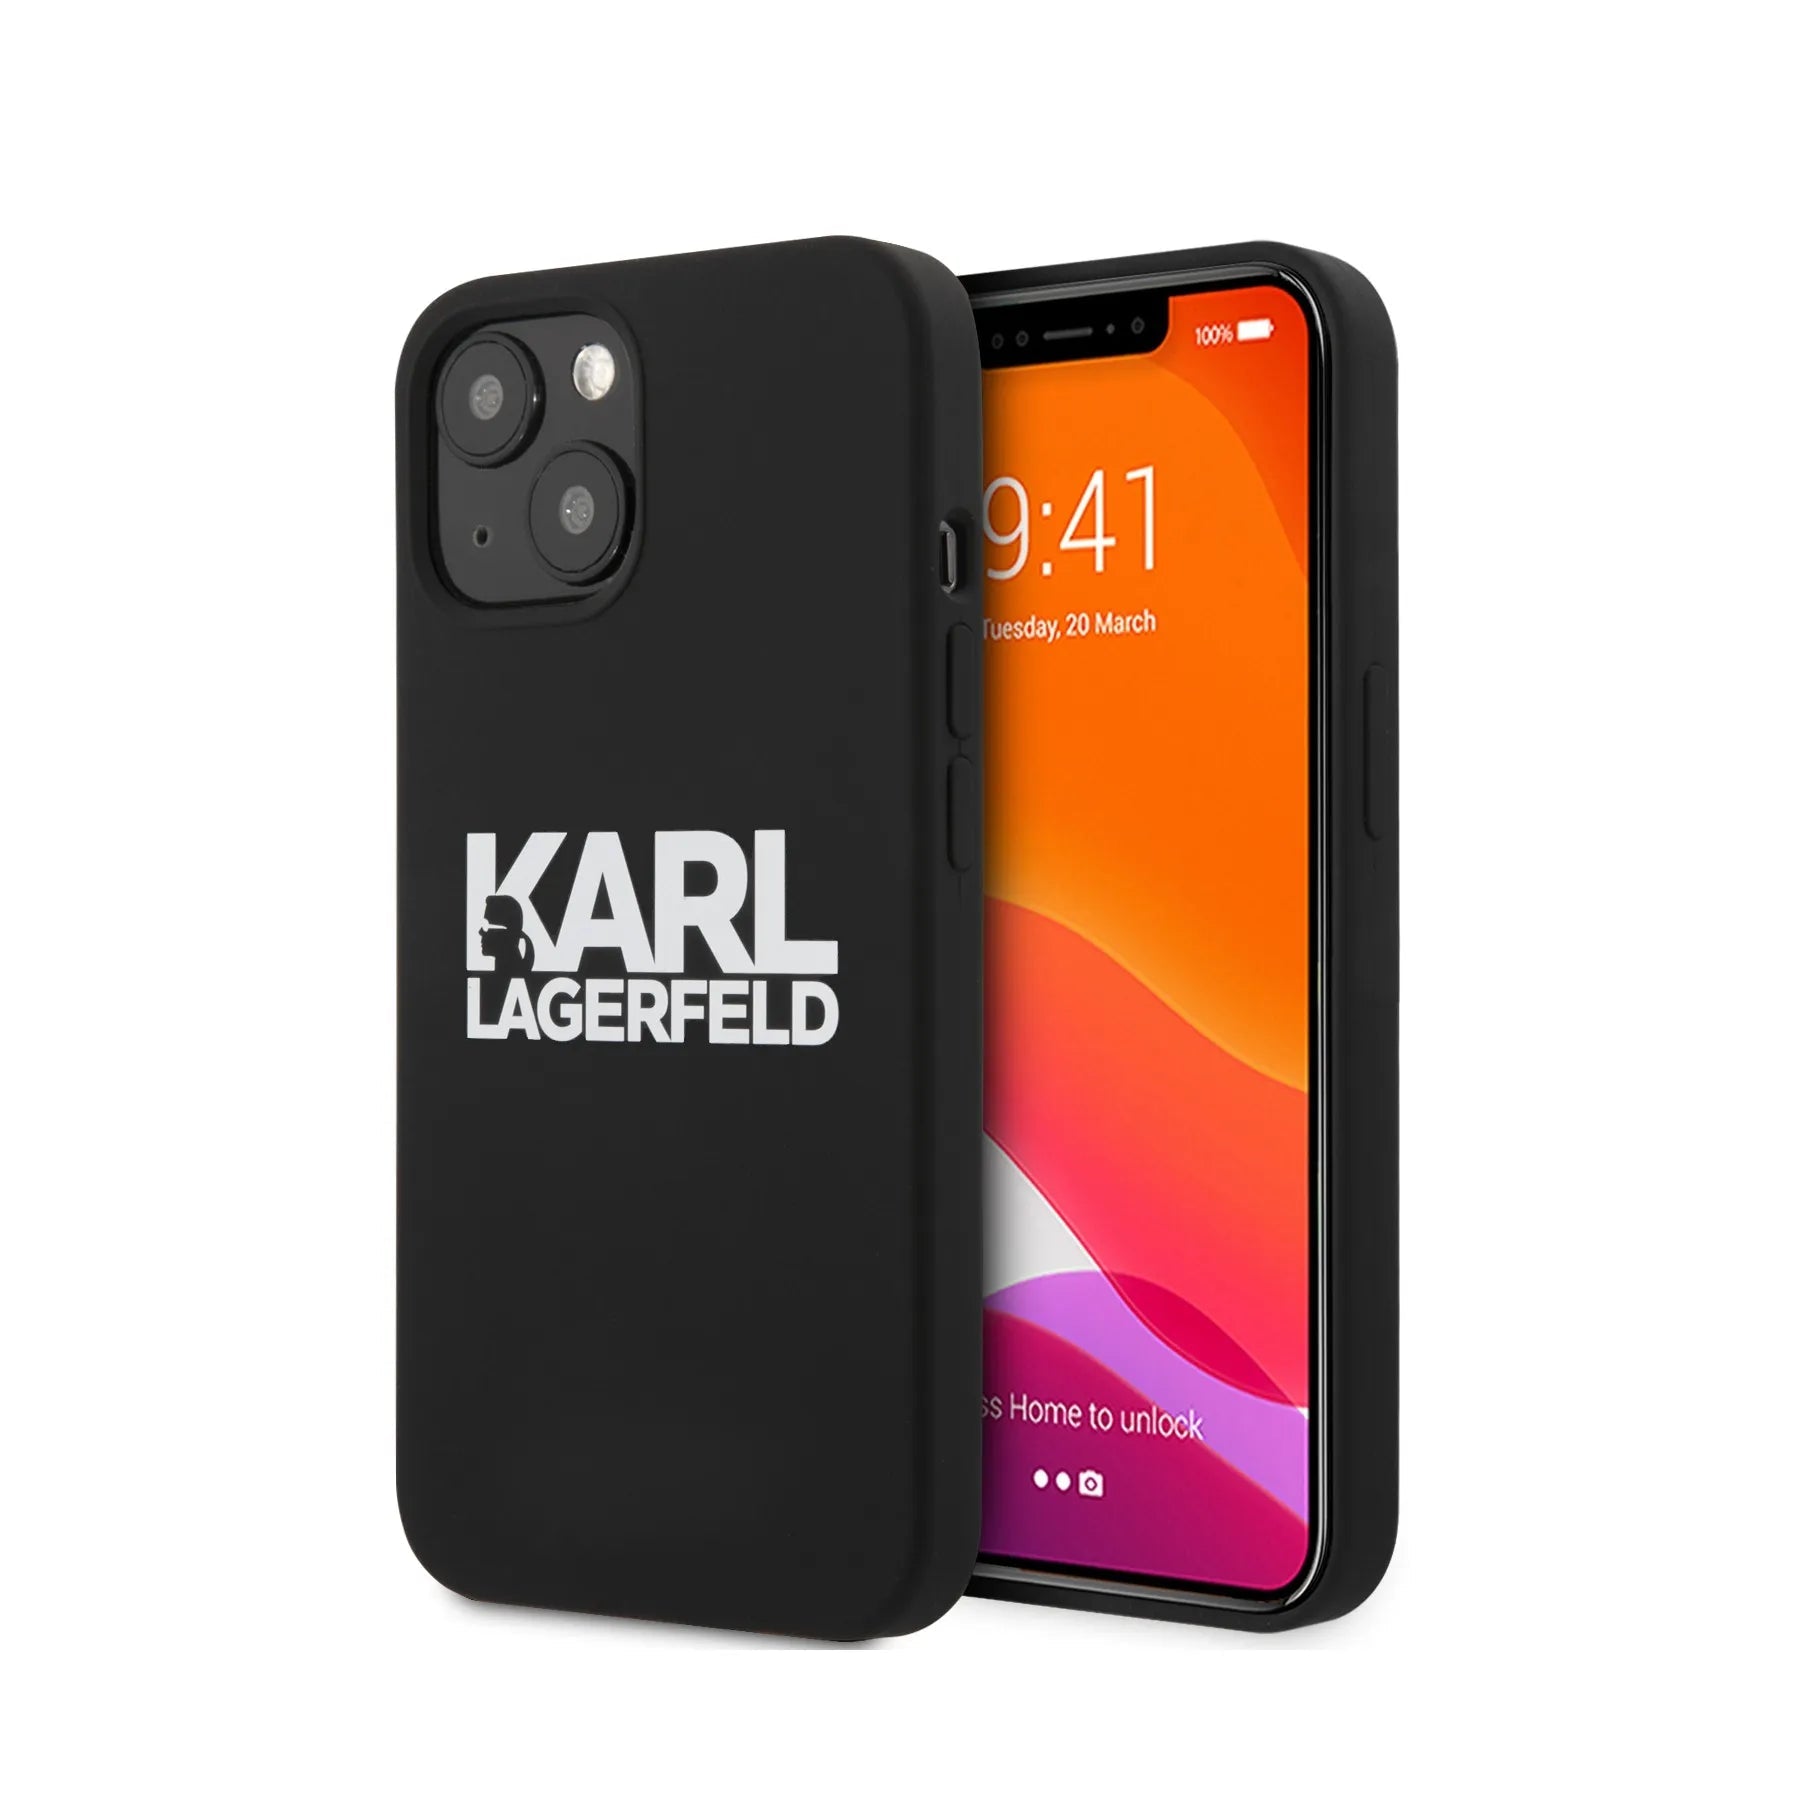 Coque Karl Lagerfeld pour iPhone 13 - My Store